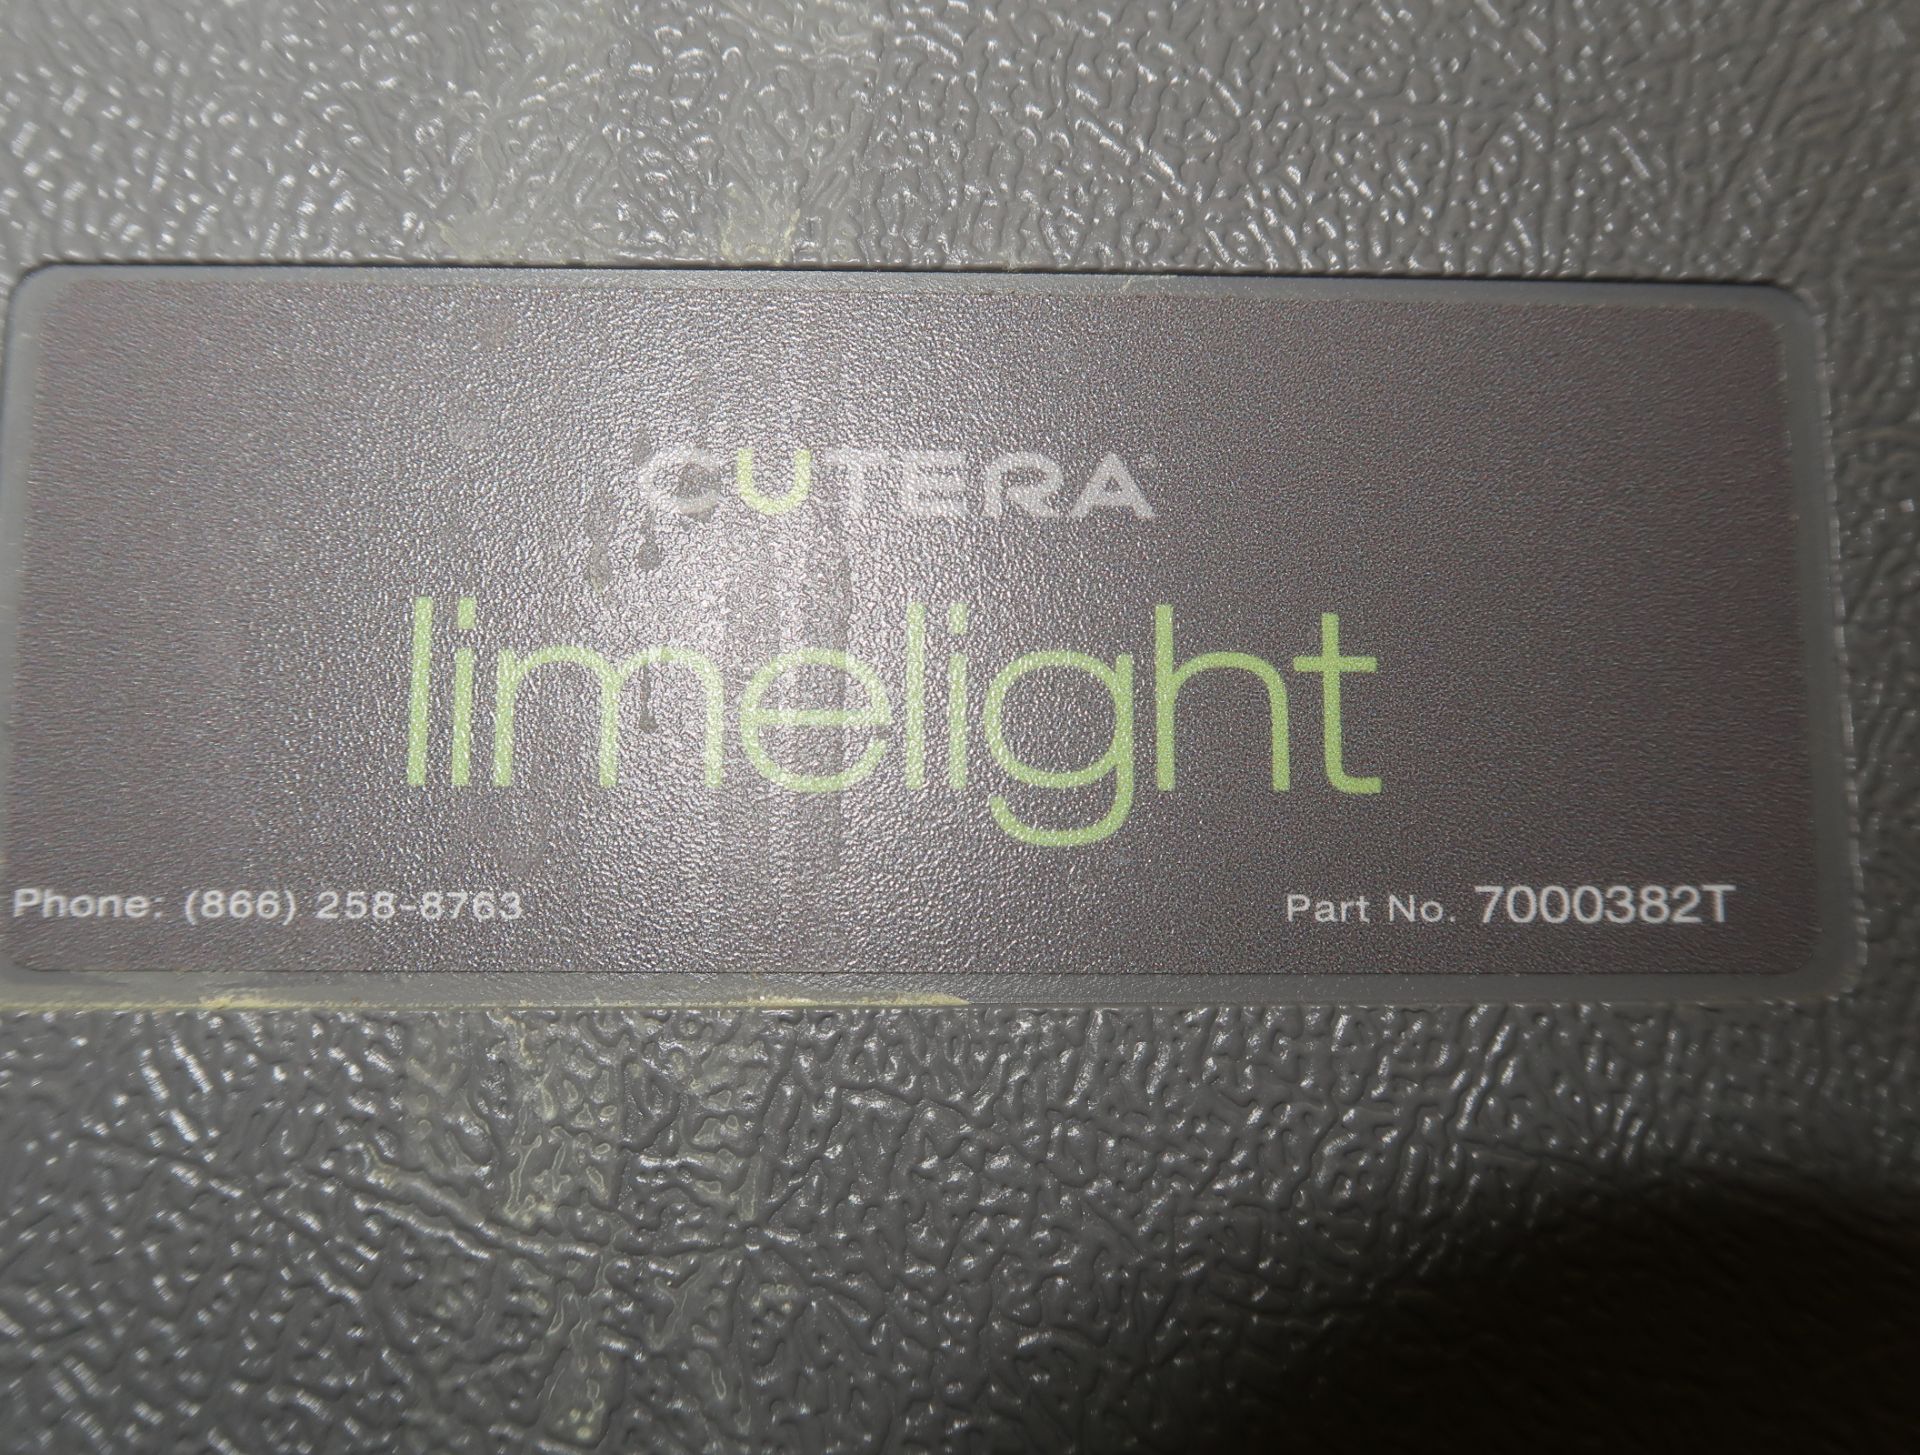 CUTERA XEO LASER, MANUFACTURED FEB. 2015, SN. XP15943 W/ PROWAVE LX & LIMELIGHT HAND PIECES. - Image 9 of 9